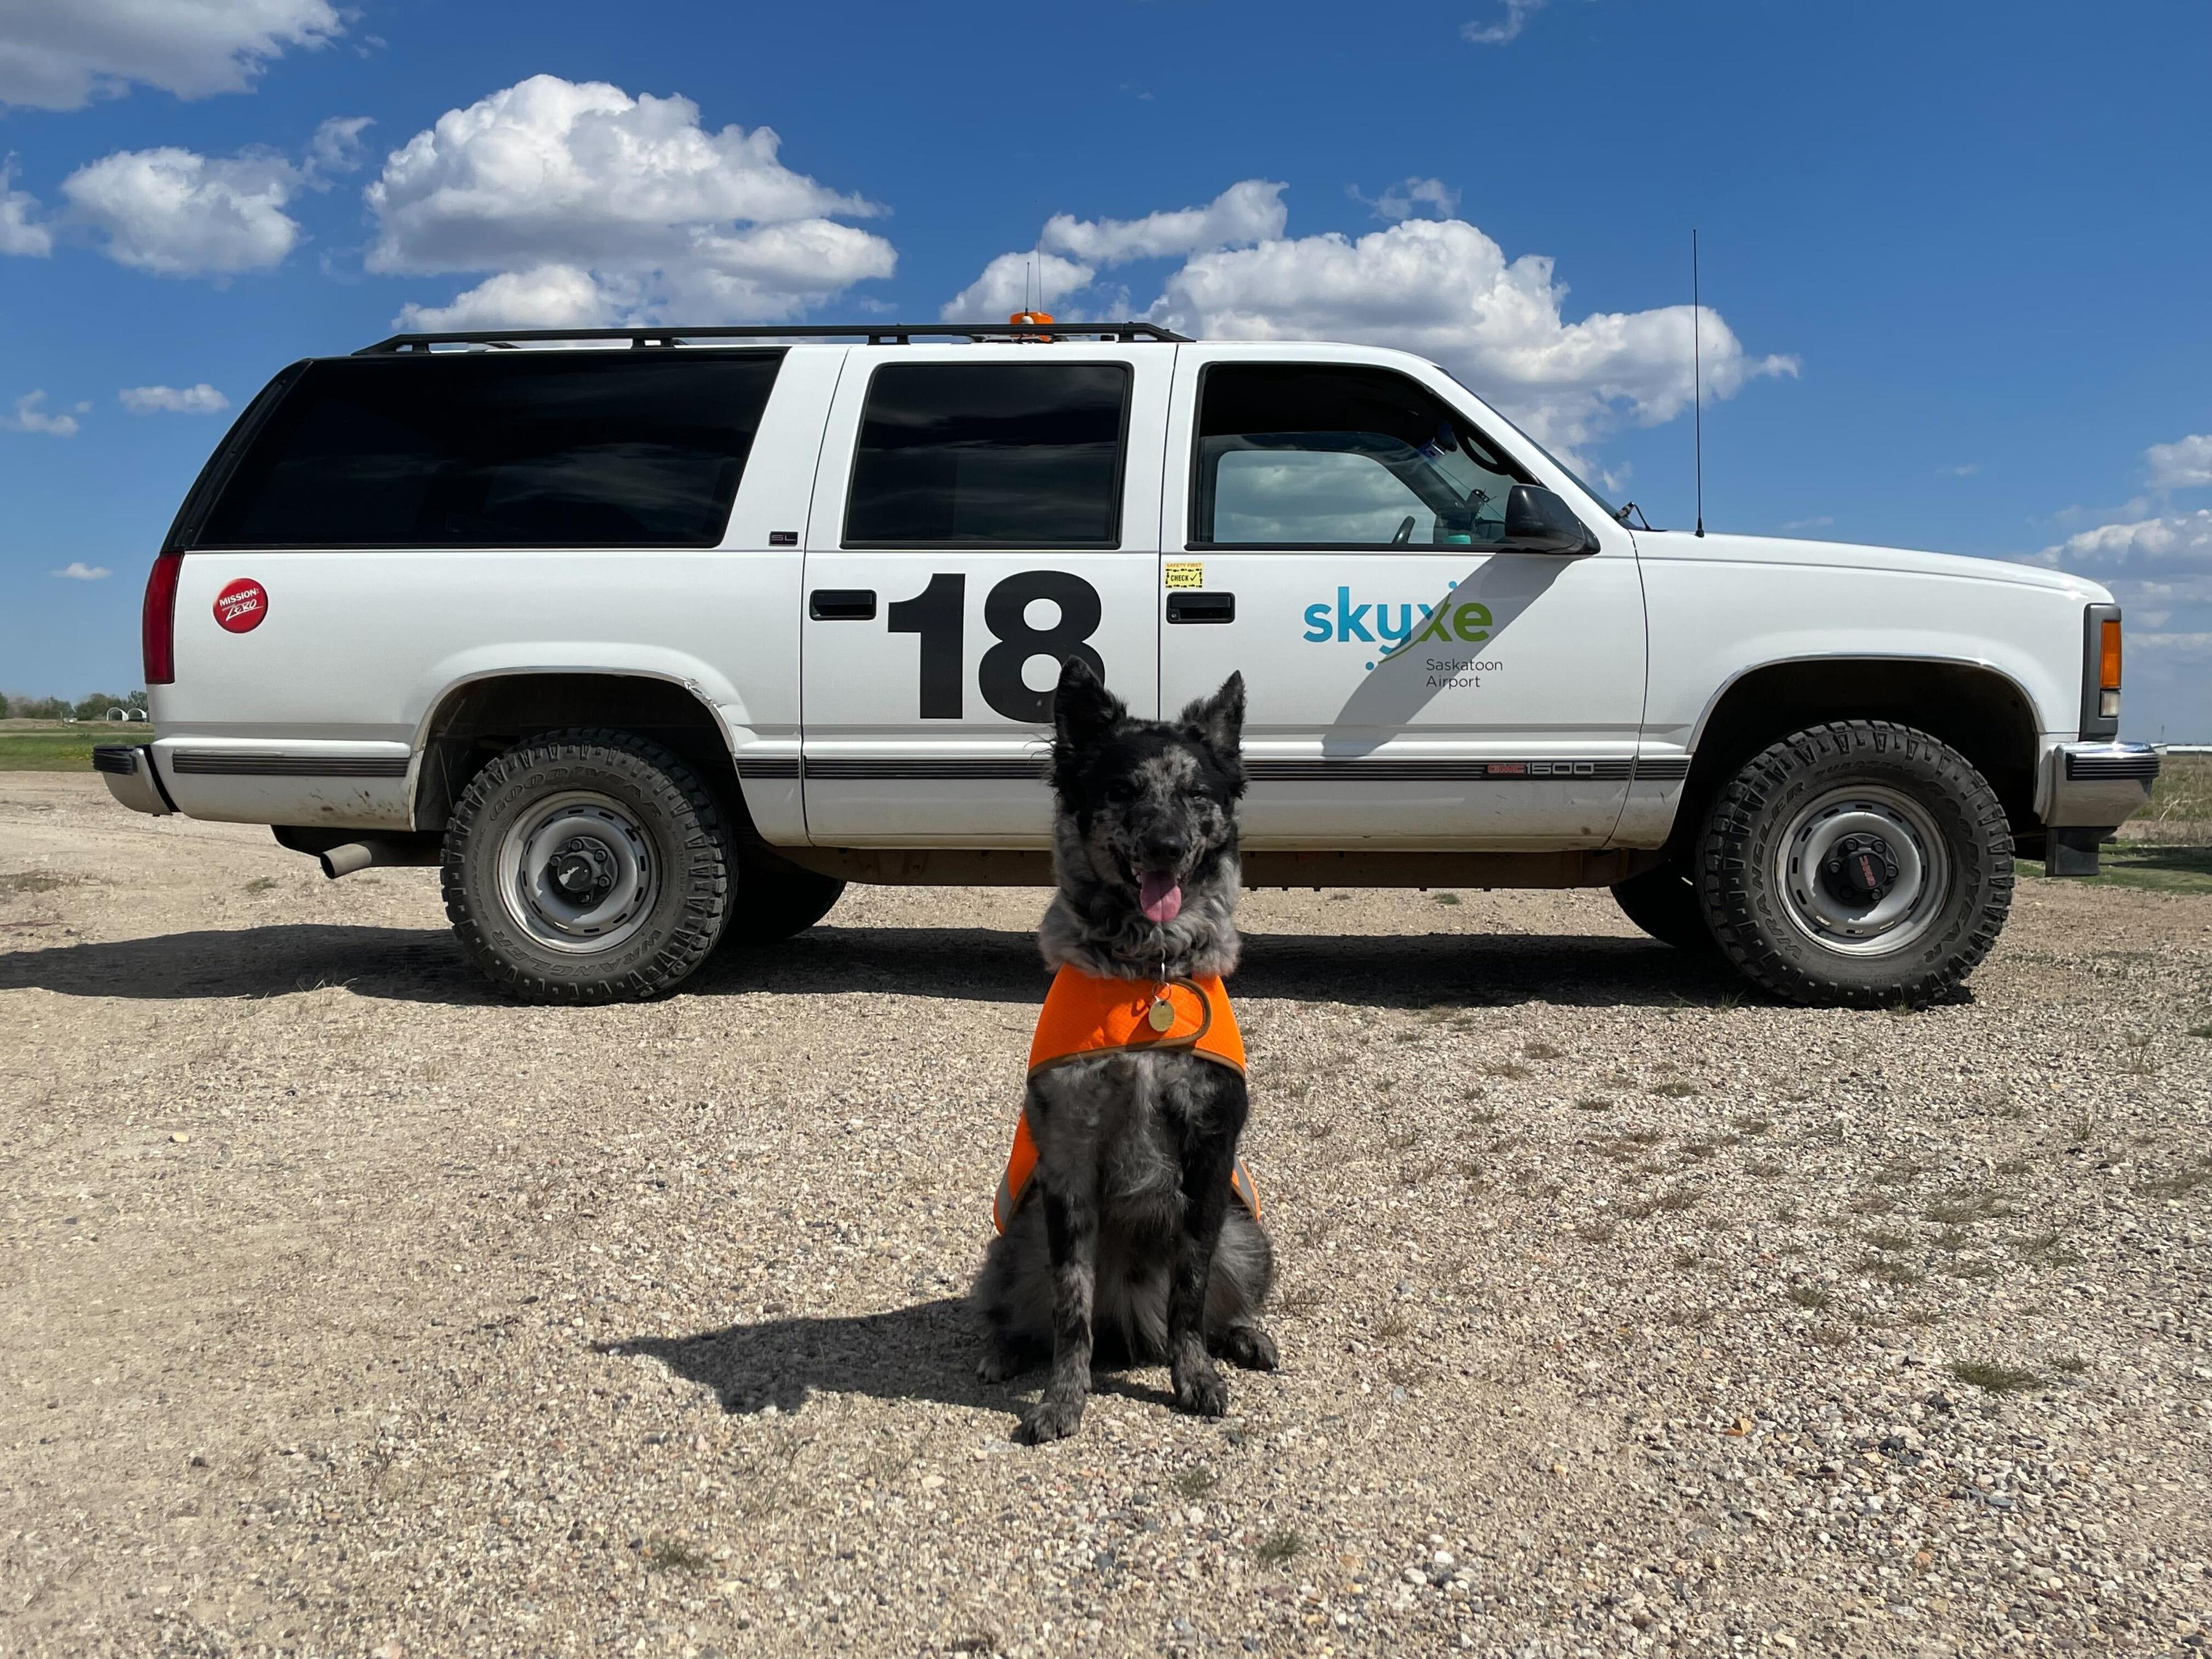 Dog wearing a high-vis vest stands in front of a airport control vehicle